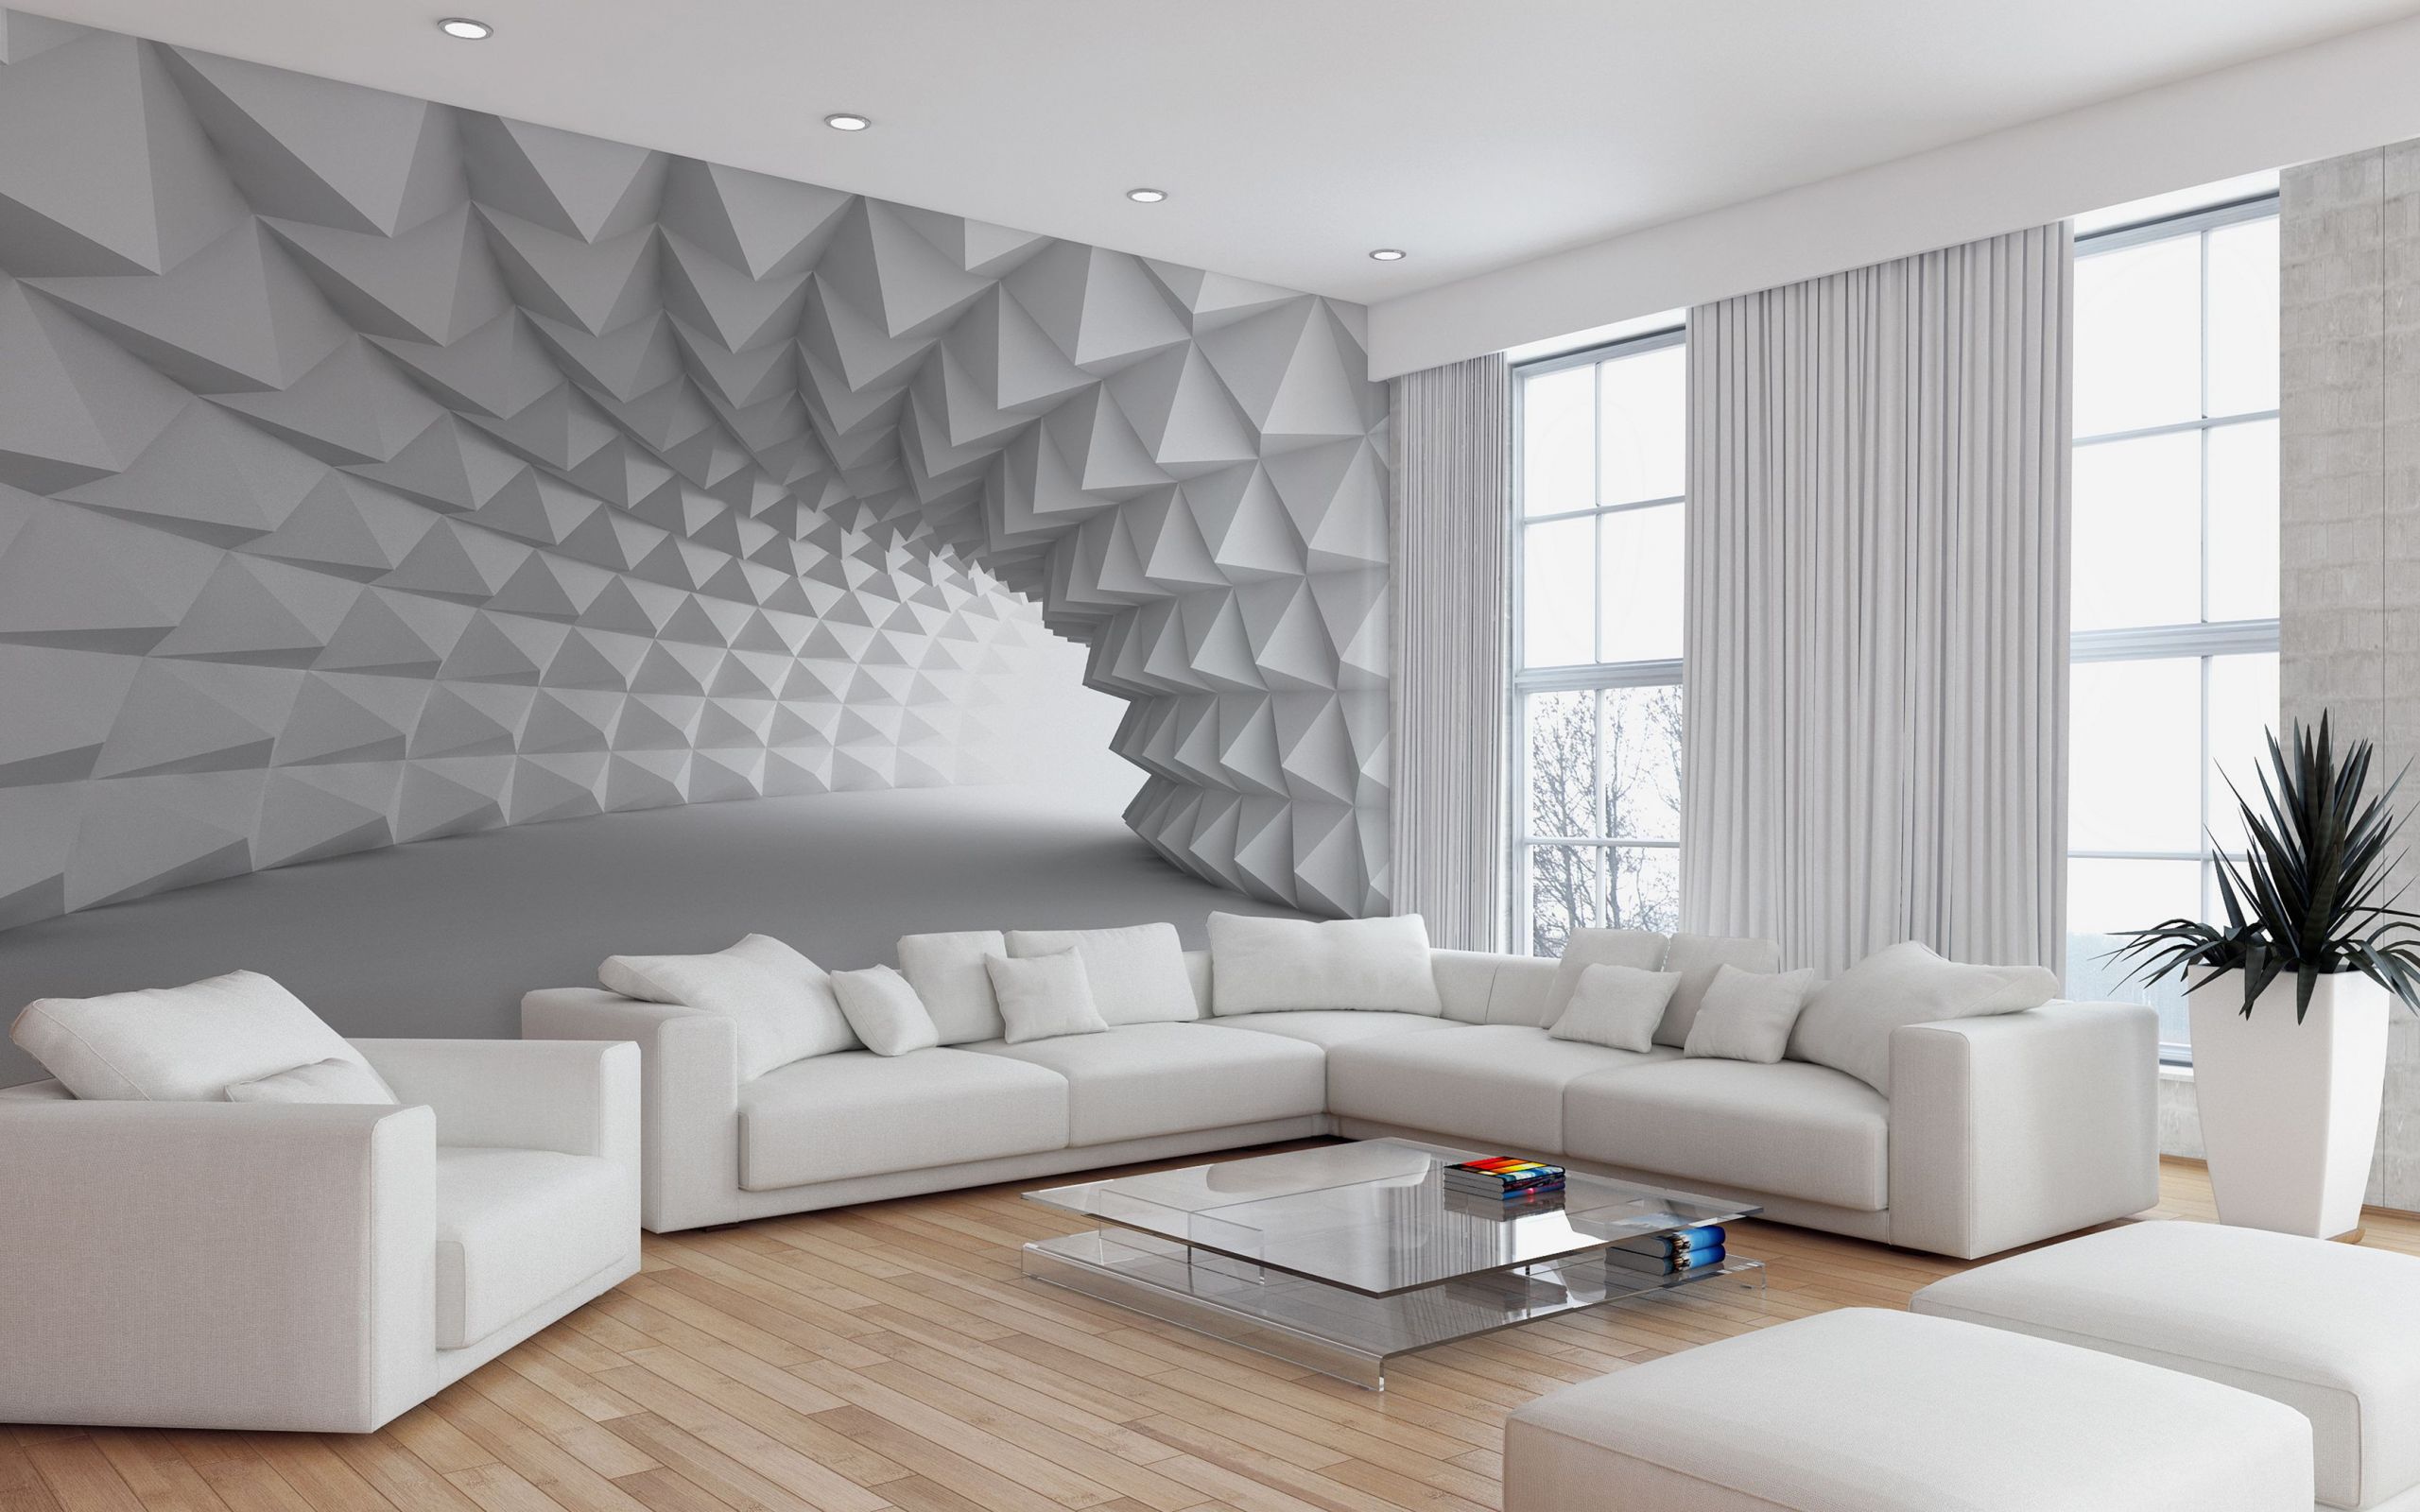 Wall Ideas For Living Room
 12 Gorgeous Living Room Design With 3D Wall Ideas To